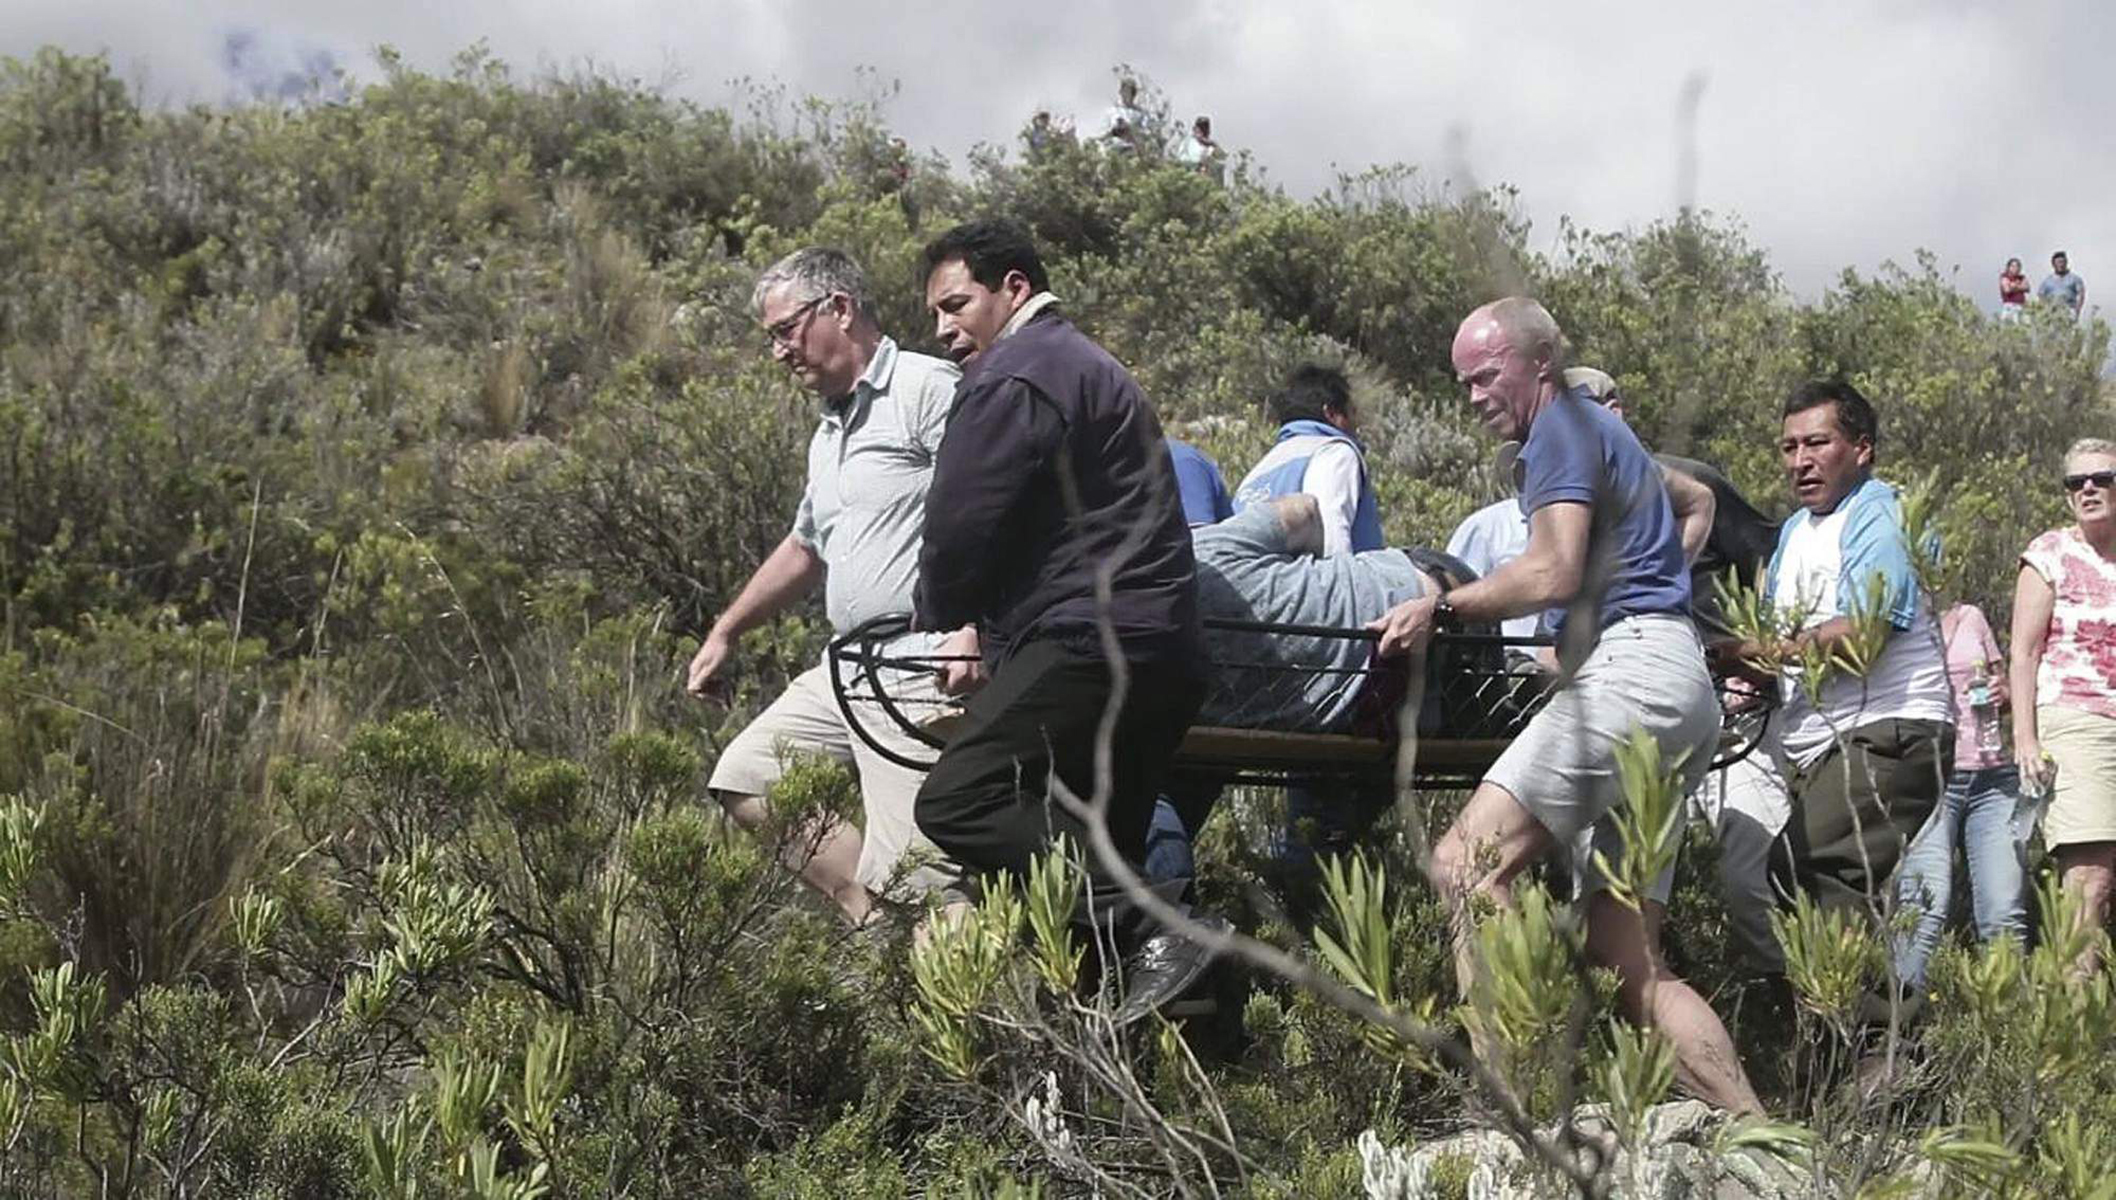 German tourists and local residents at the site of a minibus crash in Peru (Andina News Agency via AP)